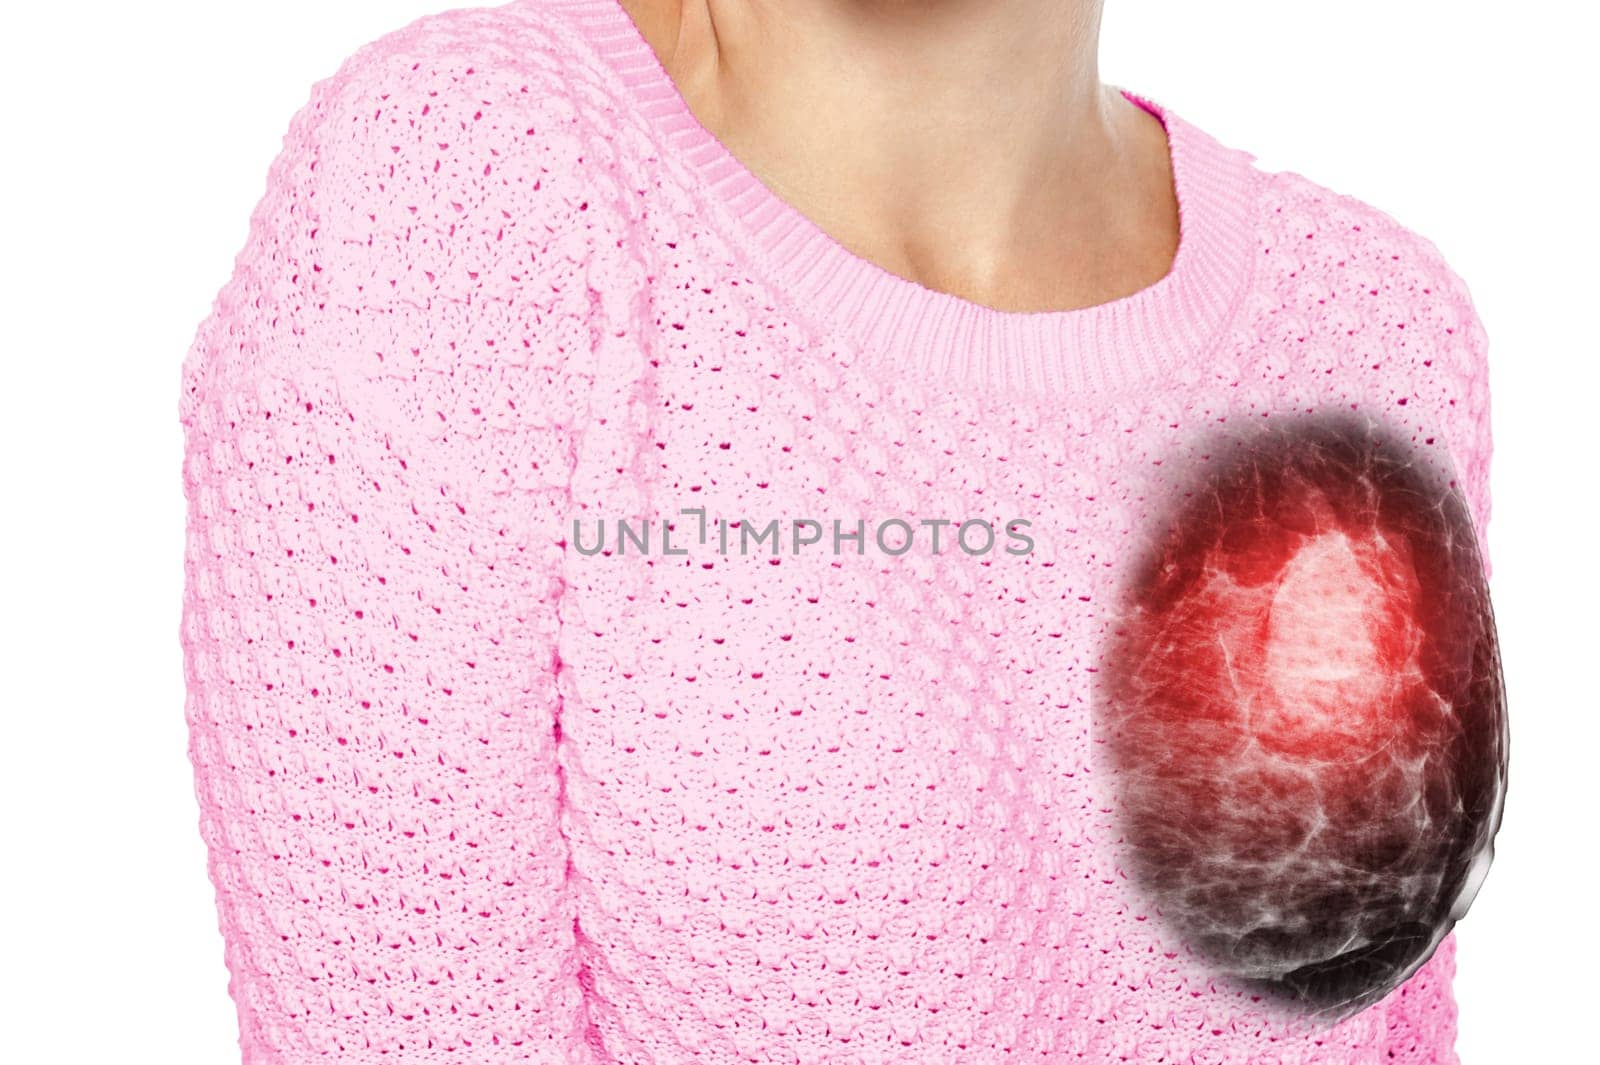 breast cancer awareness against woman for fight against breast cancer ,Mammogram image on the Left side chest of woman